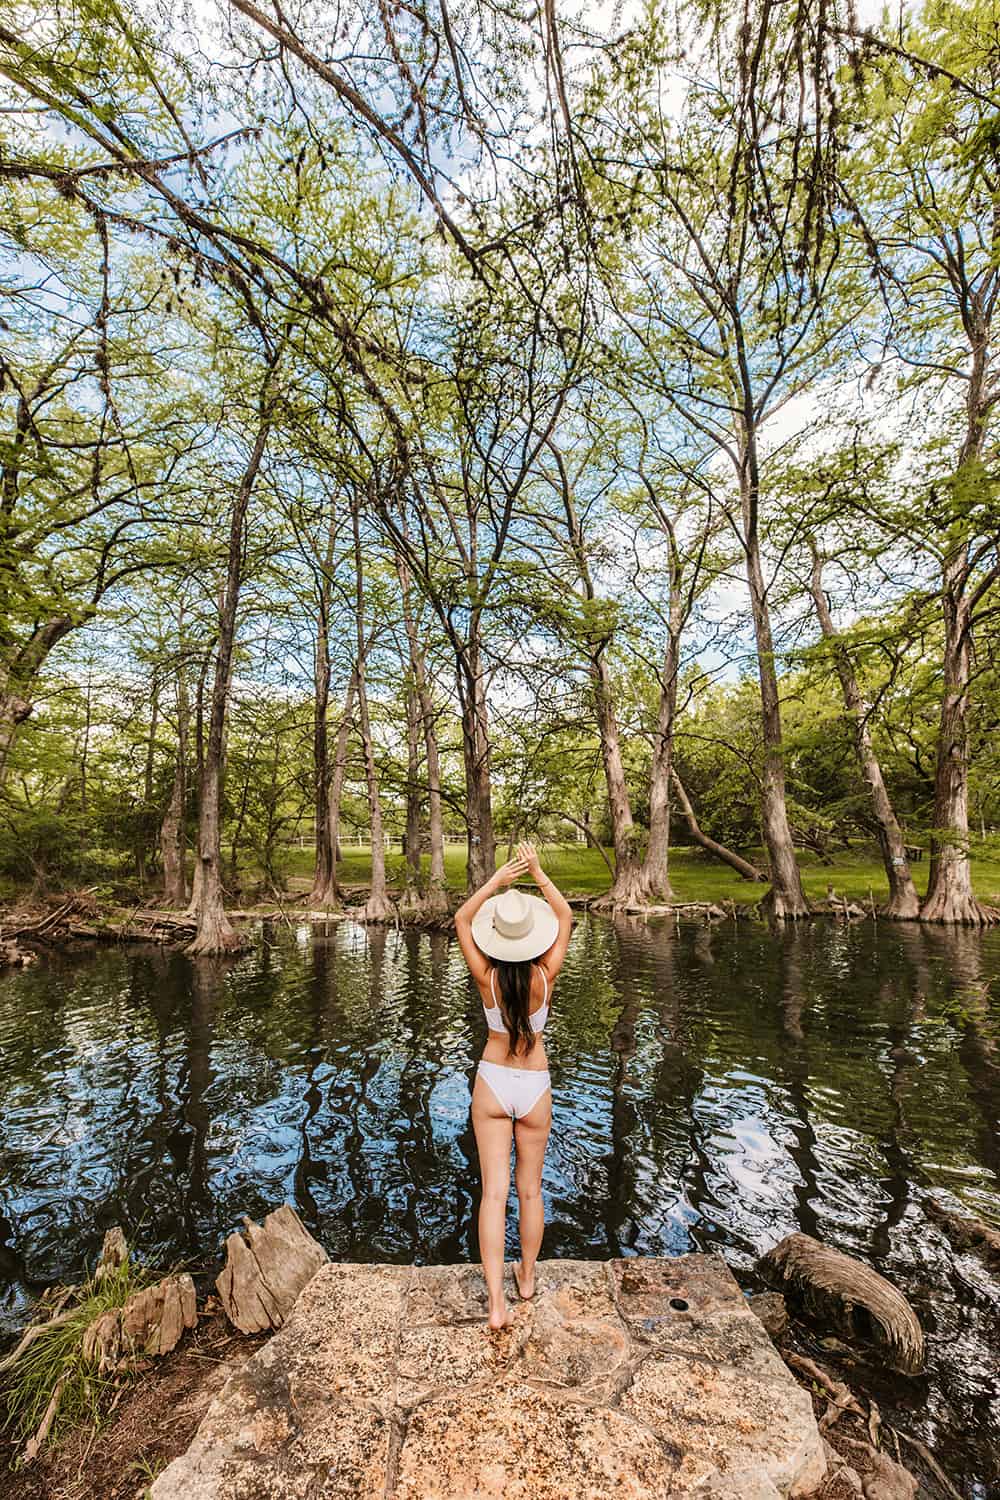 Blue Hole Swimming Hole in Wimberely Texas